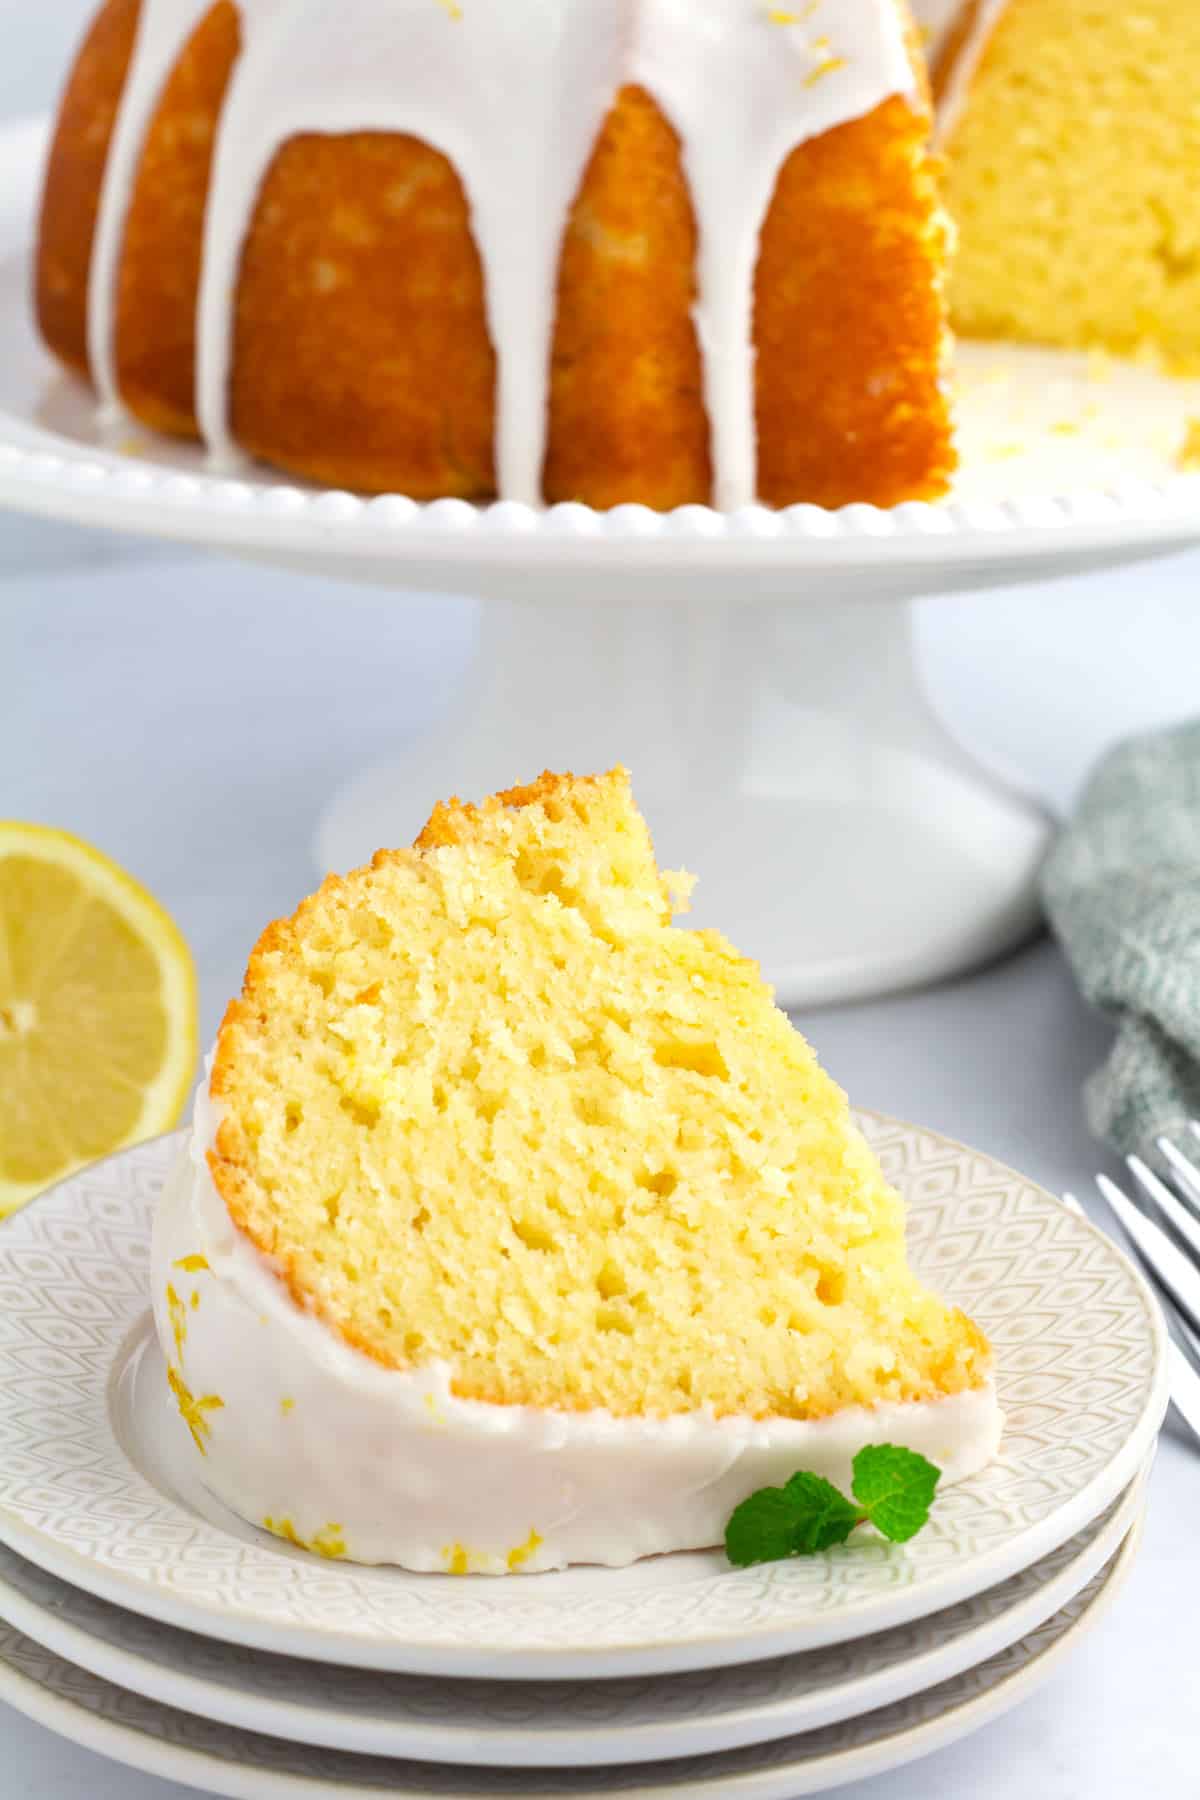 Slice of lemon cake on a plate with the full bundt cake and lemon slices in the background.